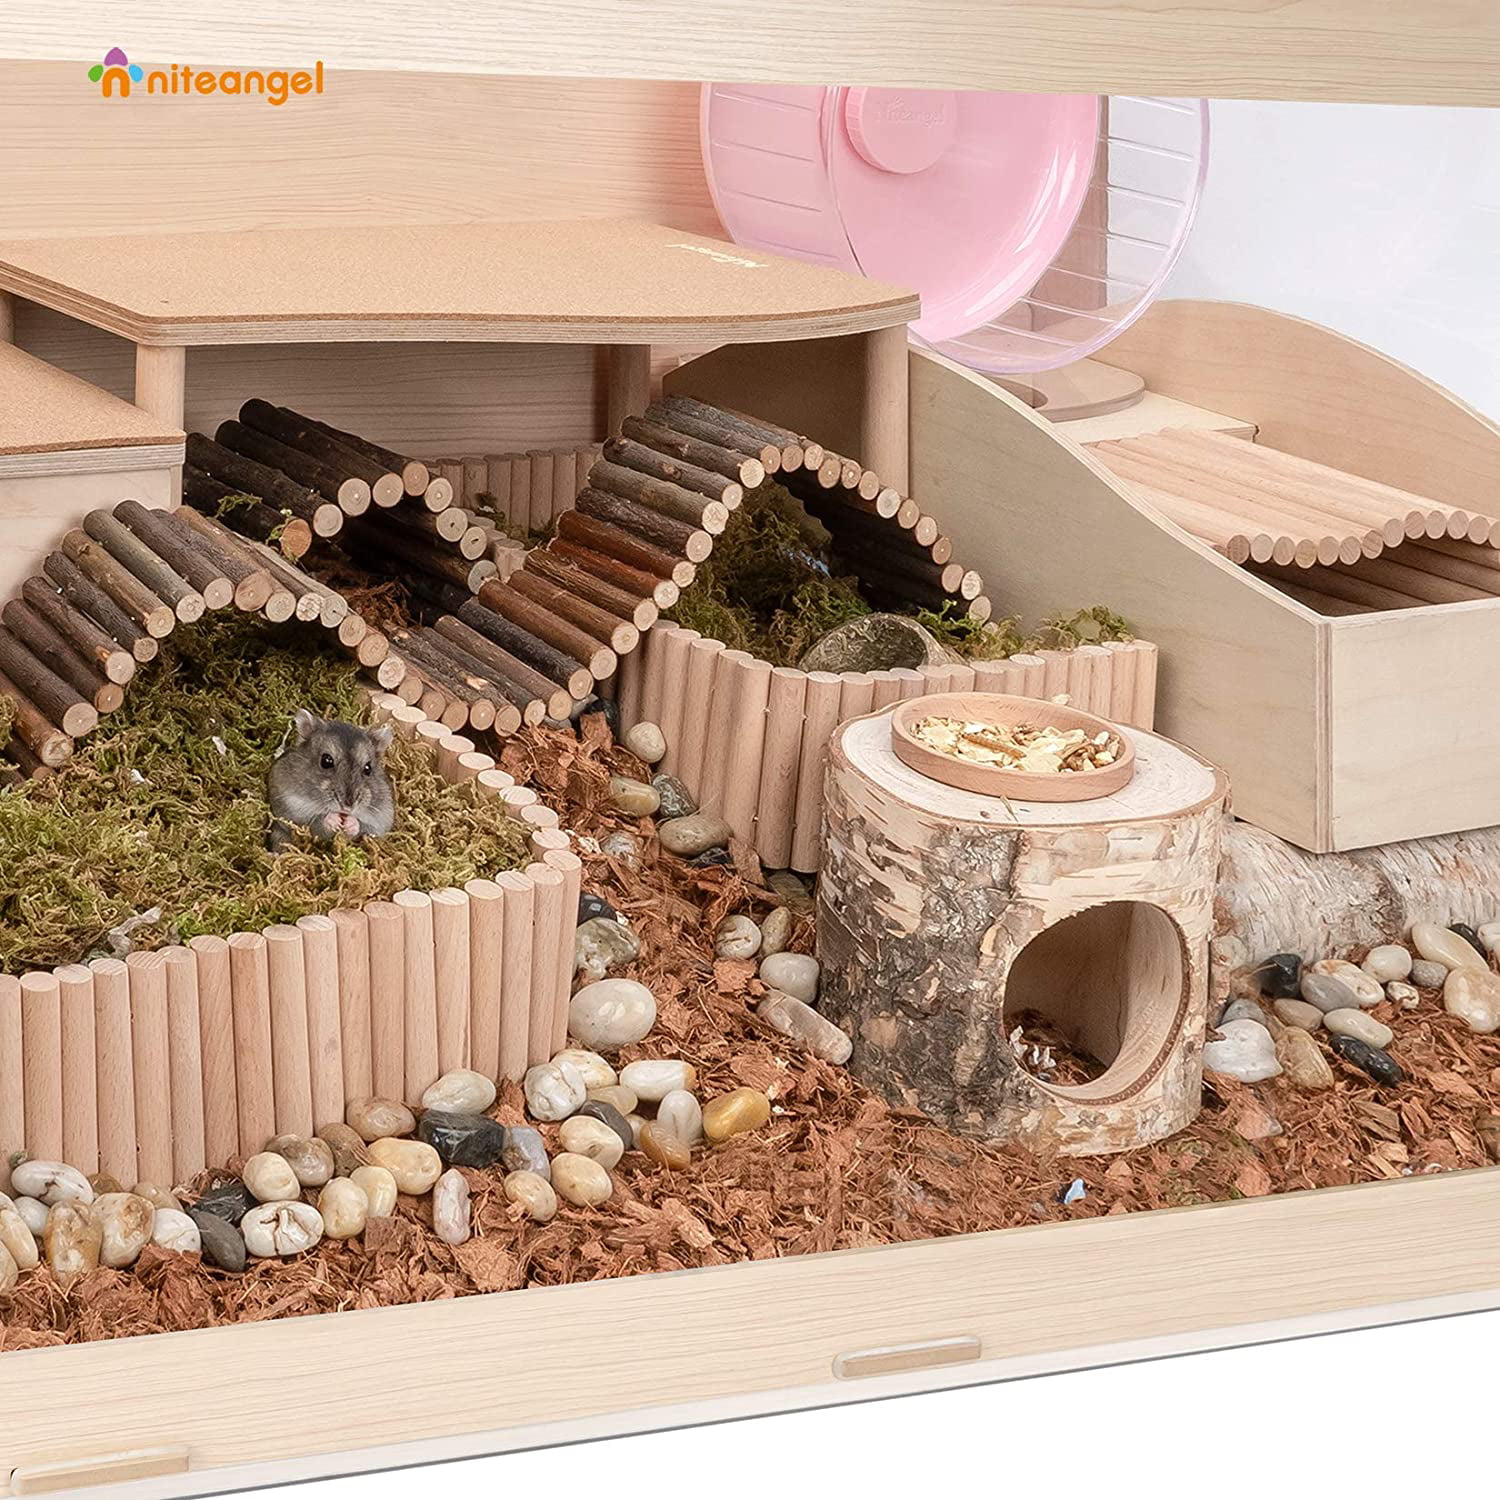 NEW NiteangeL Natural Living Tunnel System Small Animal House FREE SHIPPING 